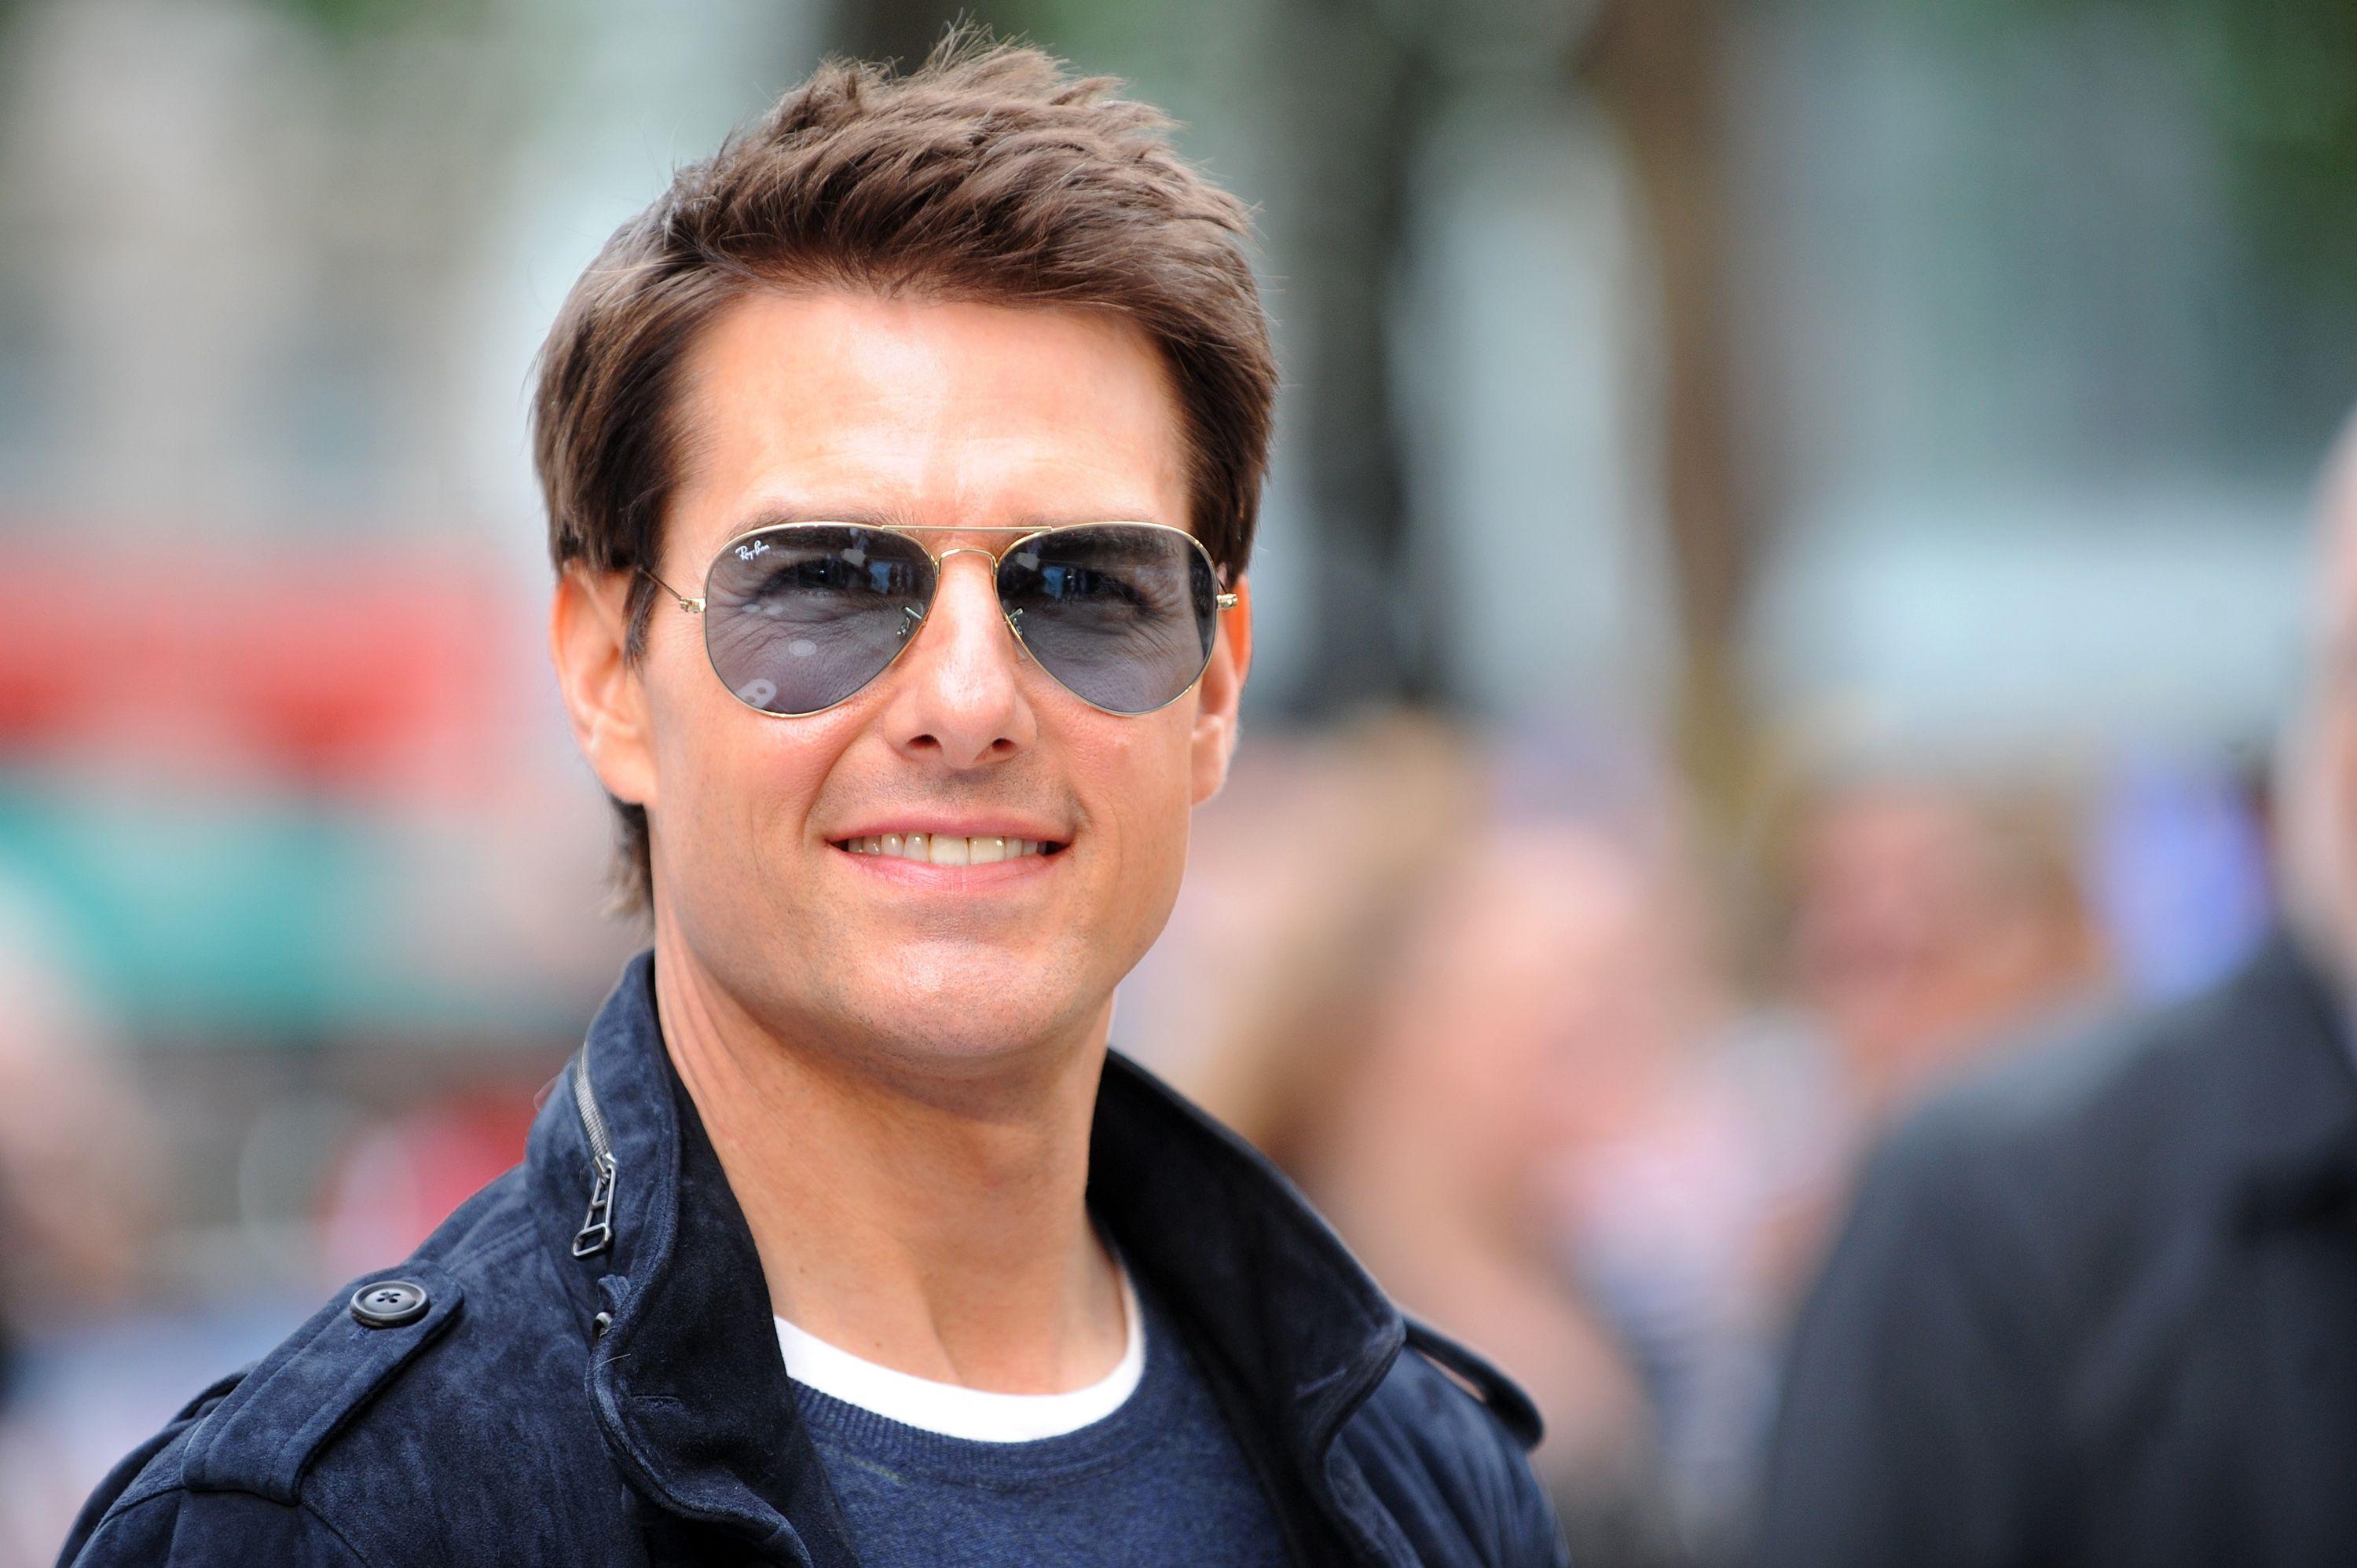 Tom cruise upcoming movies 2019 and beyond (Top Listed)